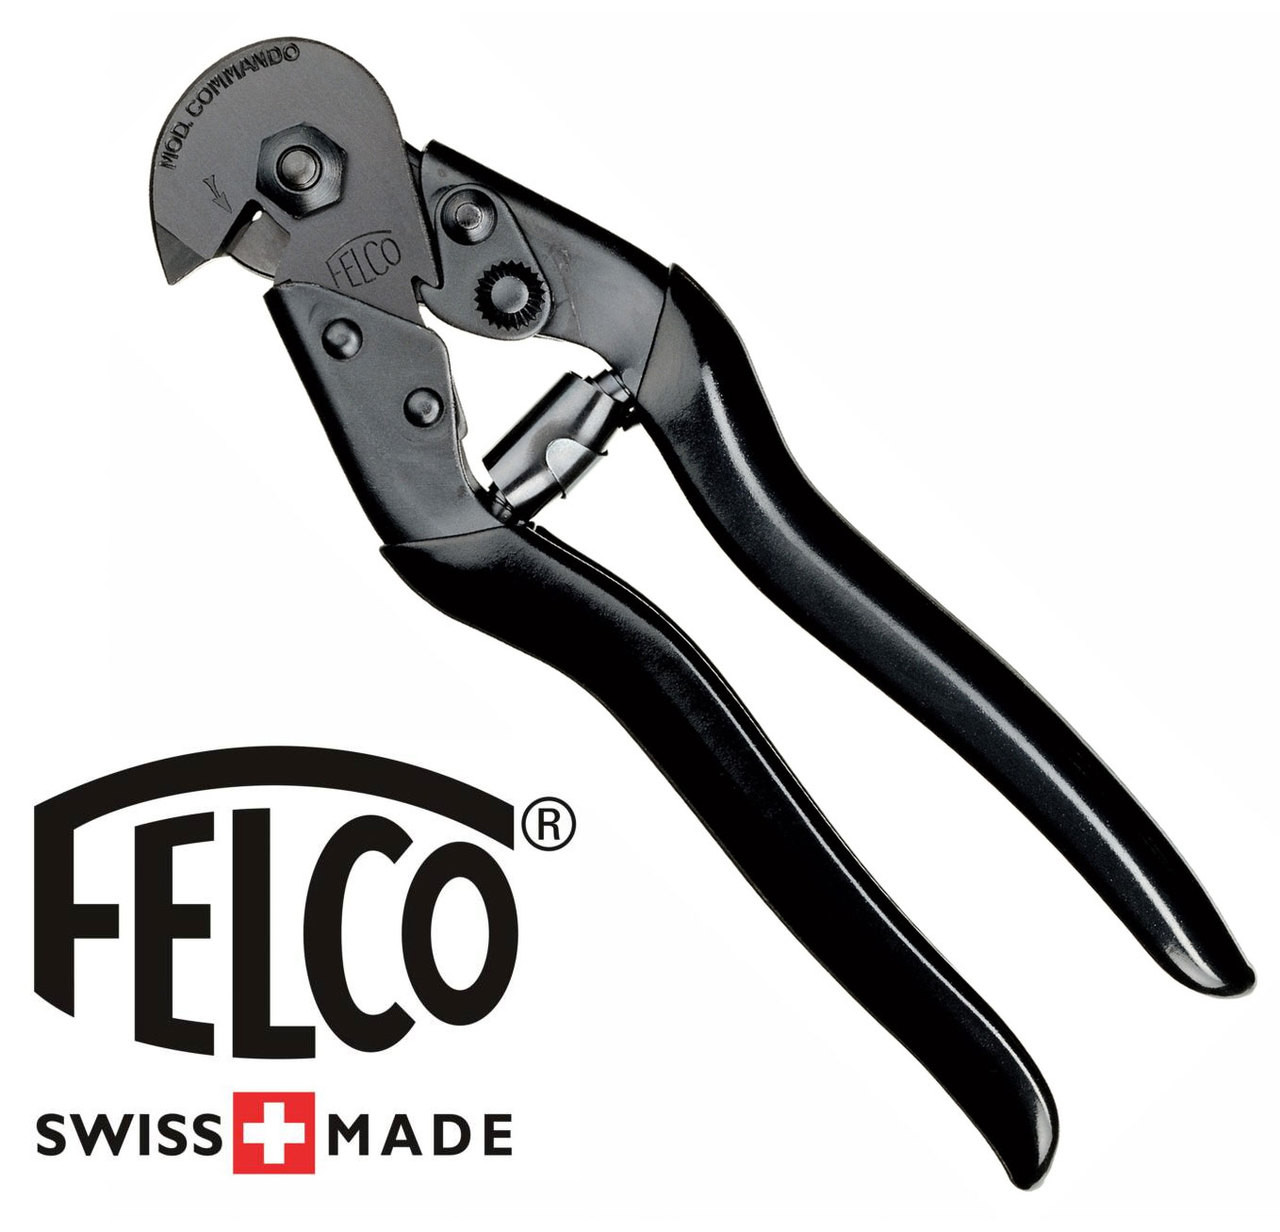 FELCO Steel Cable Cutter